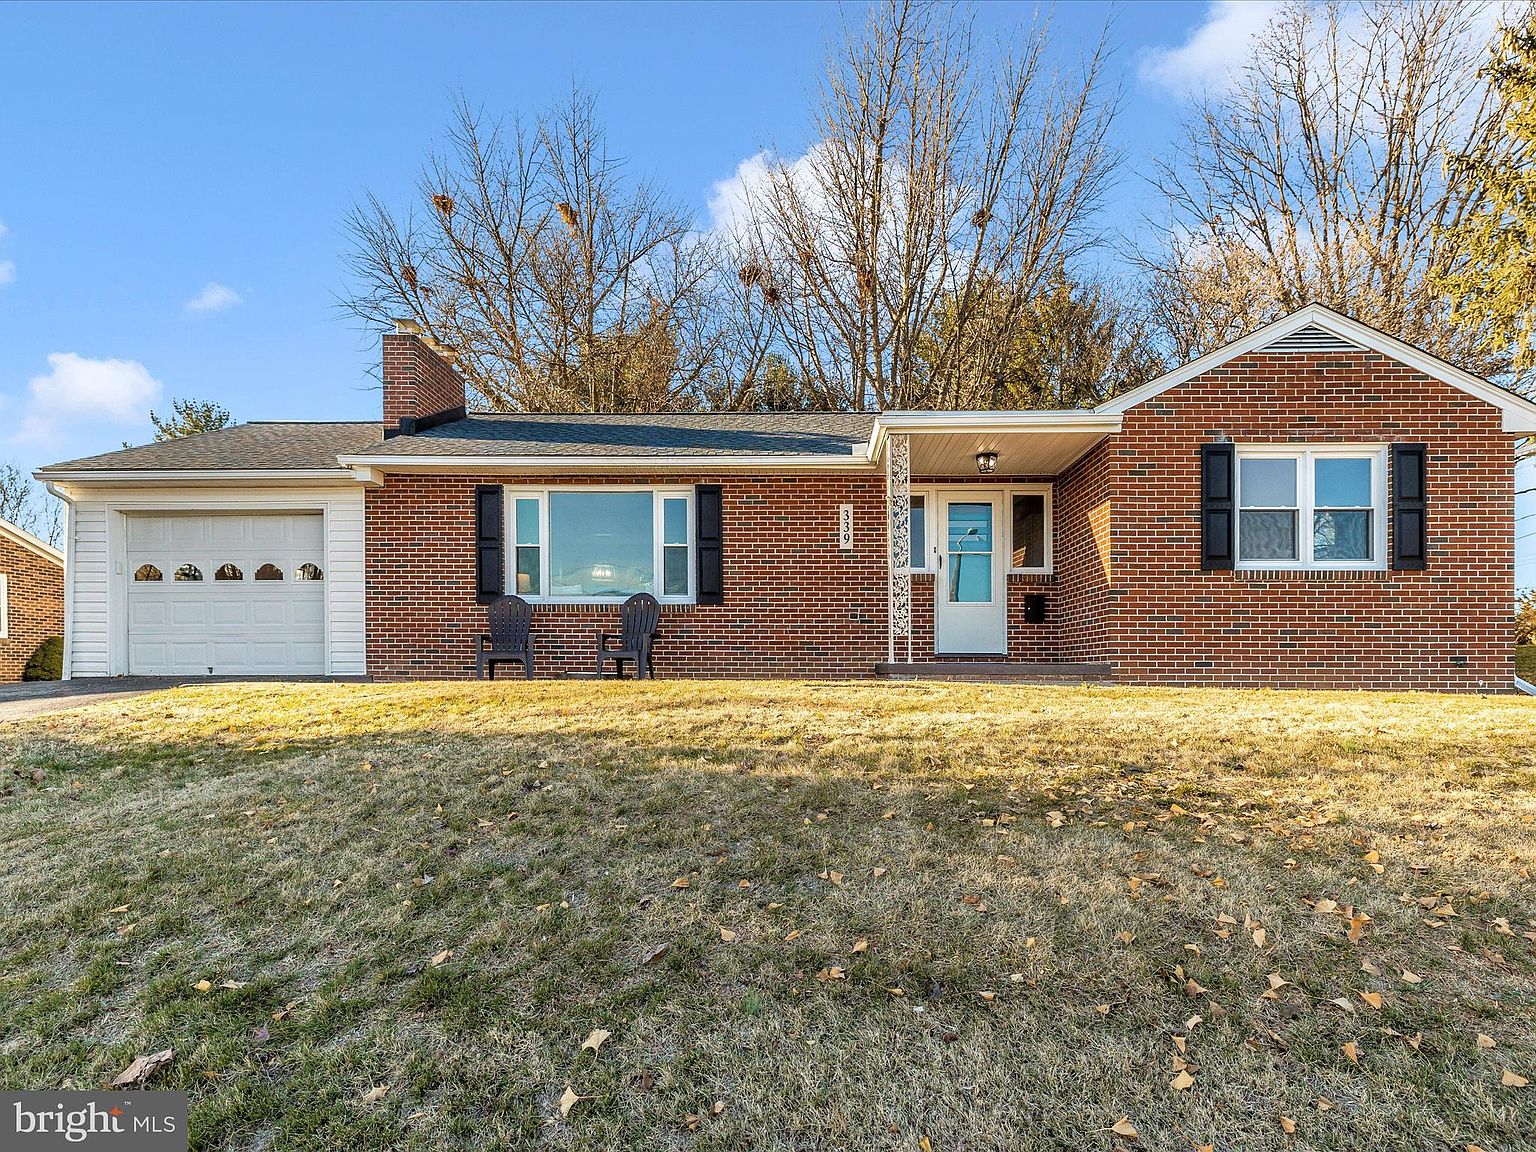 339 Key Ave, Hagerstown, MD 21740 | Zillow